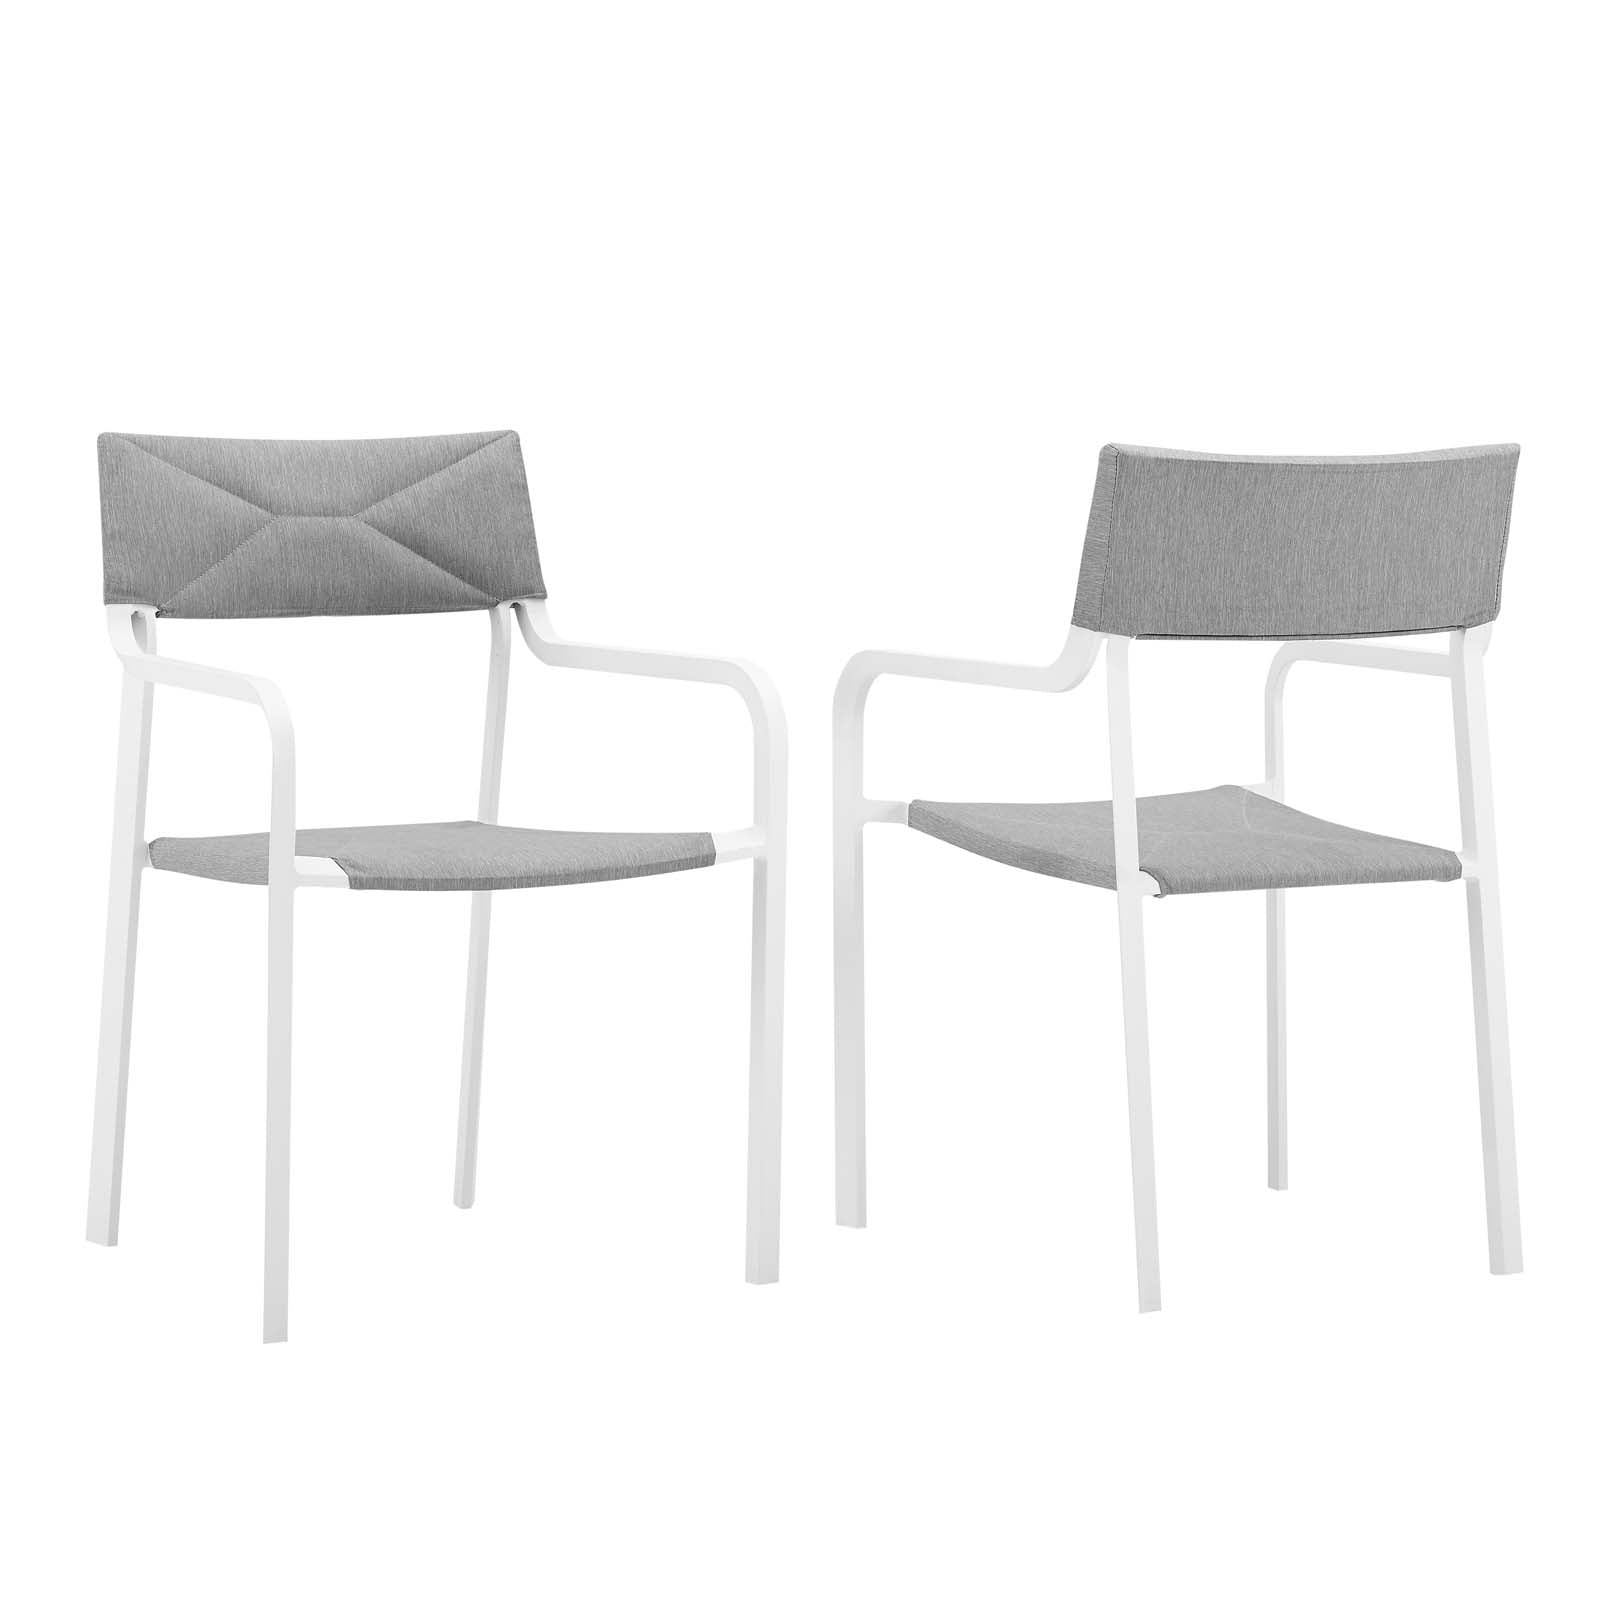 Raleigh Outdoor Patio Aluminum Armchair Set of 2 - East Shore Modern Home Furnishings